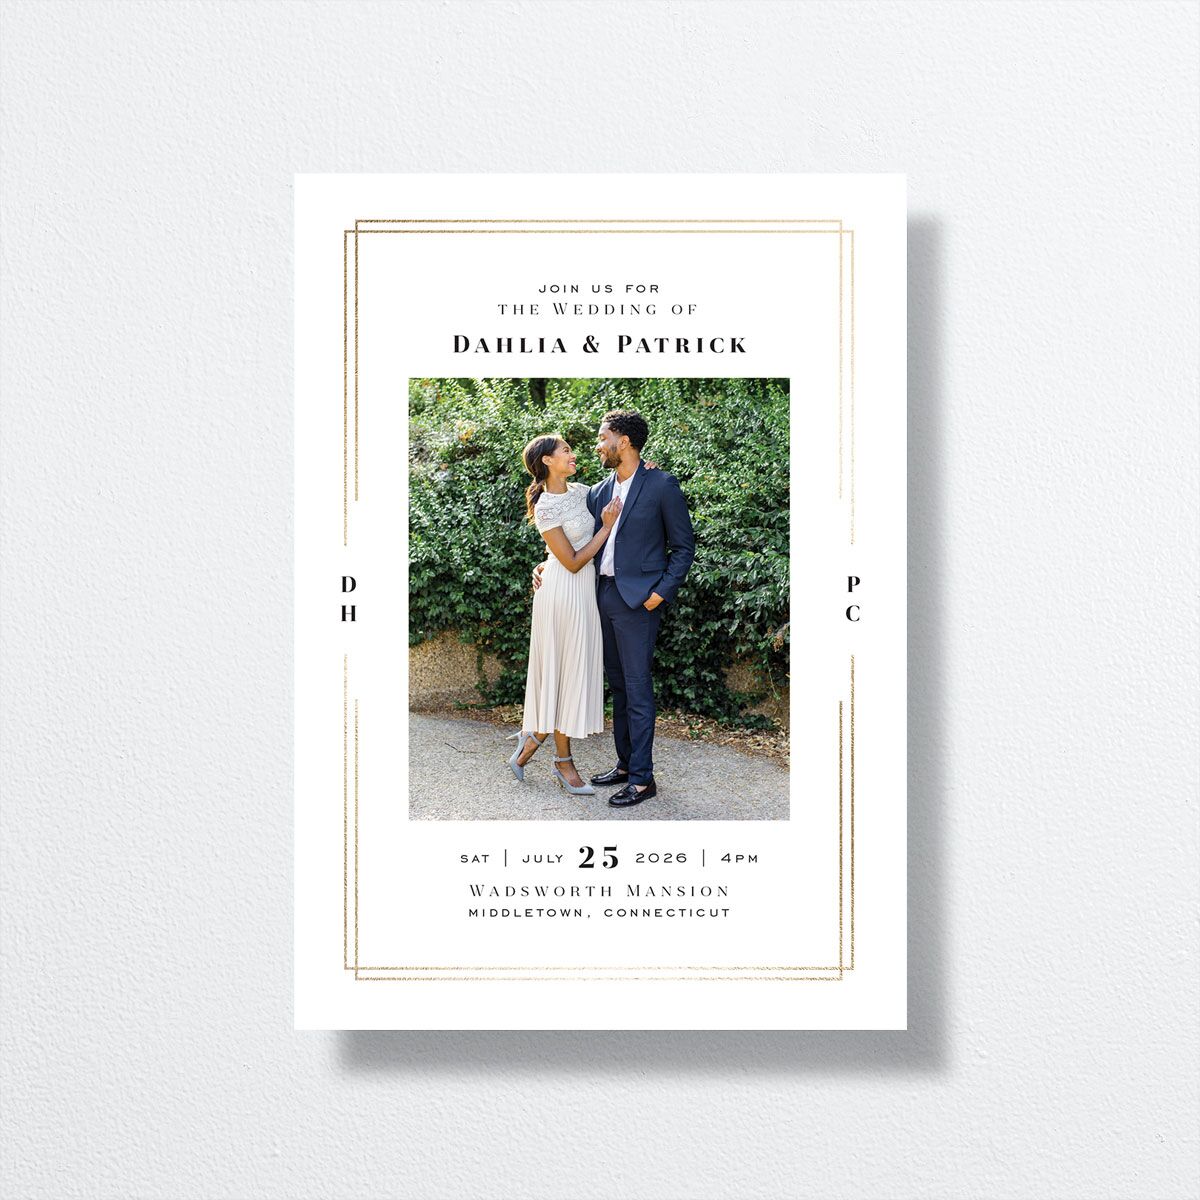 Framed Photo Wedding Invitations front in white